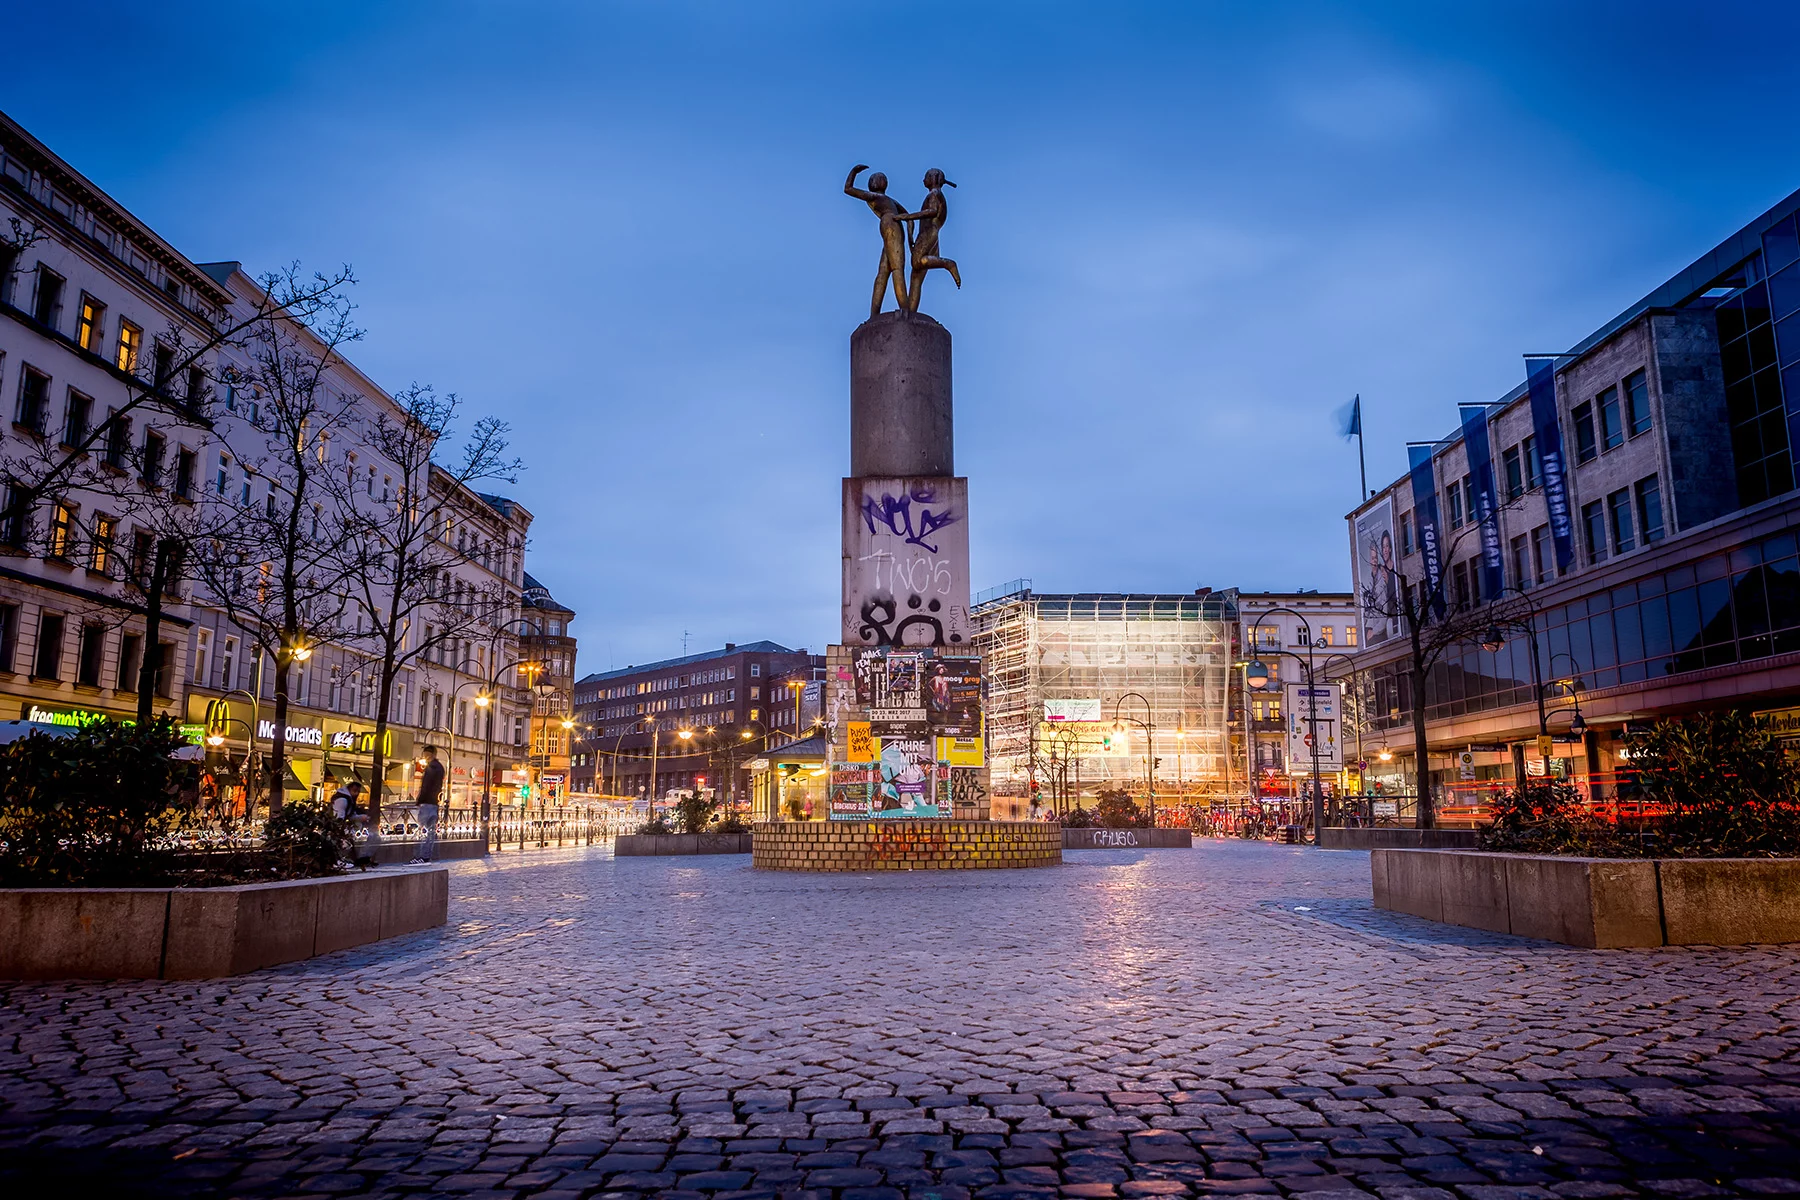 A town square with statues at night in Neuköllln, Berlin